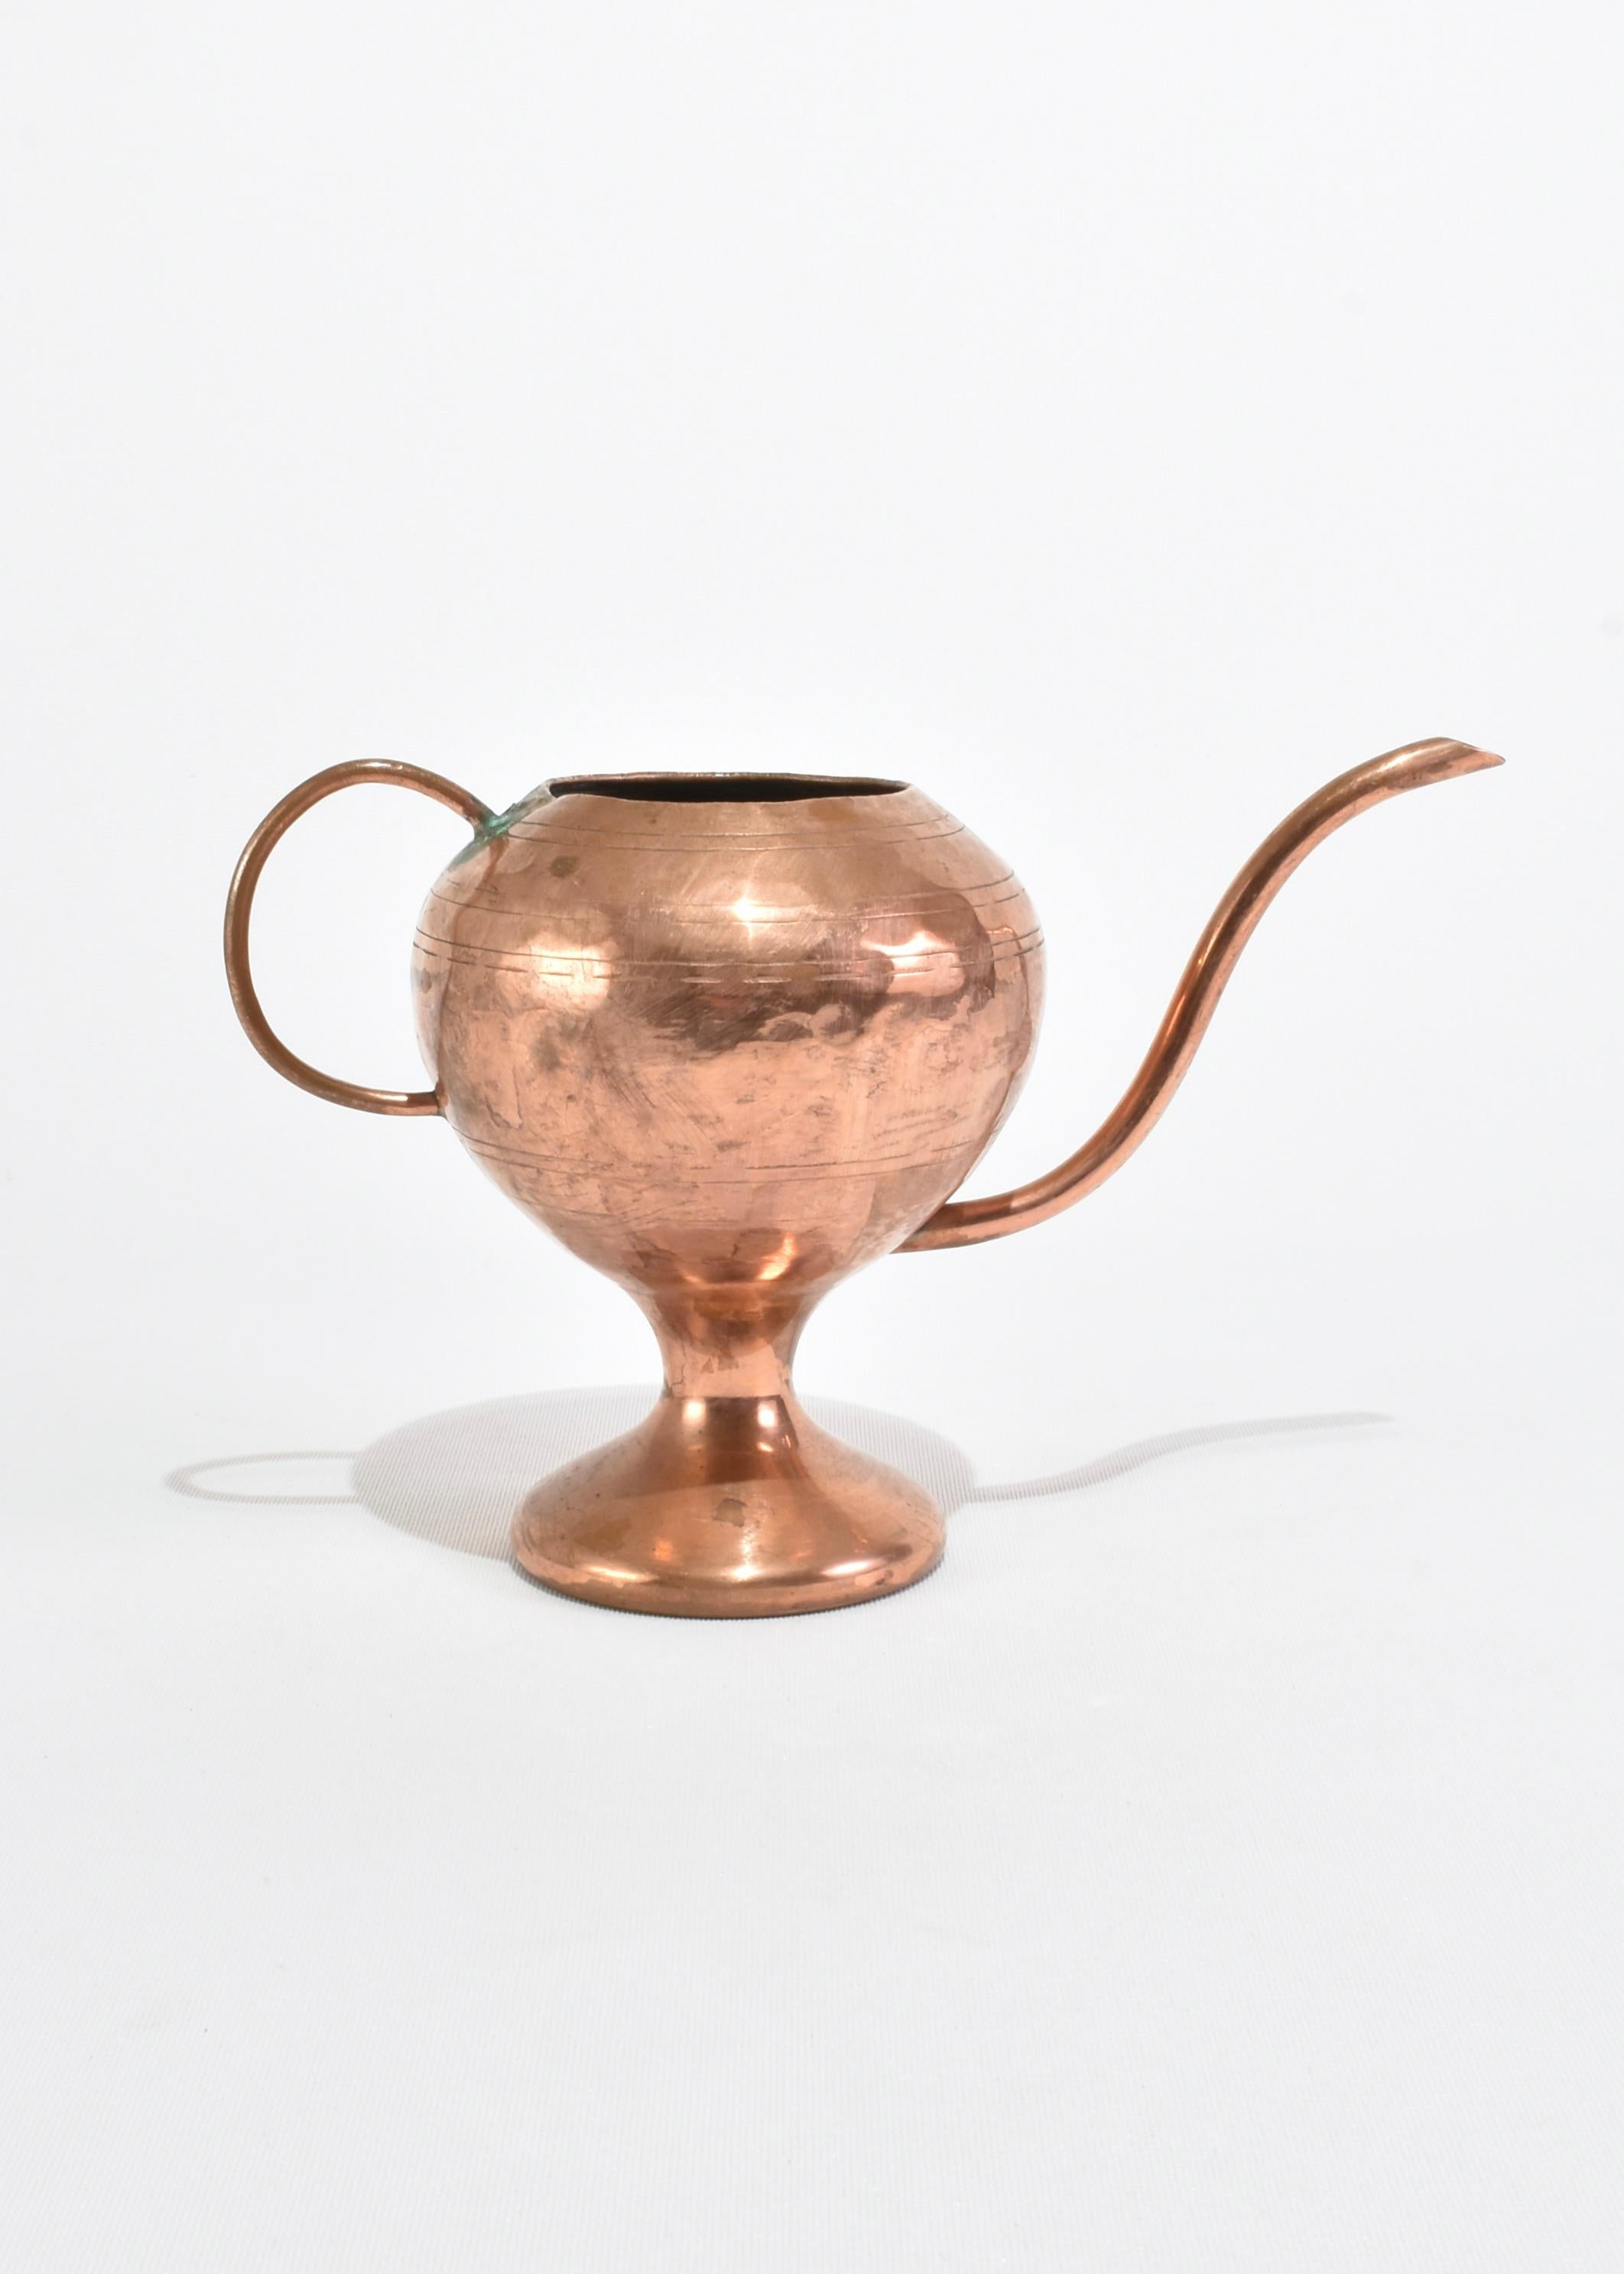 Sculptural vintage watering can with a handle and elongated spout in copper.